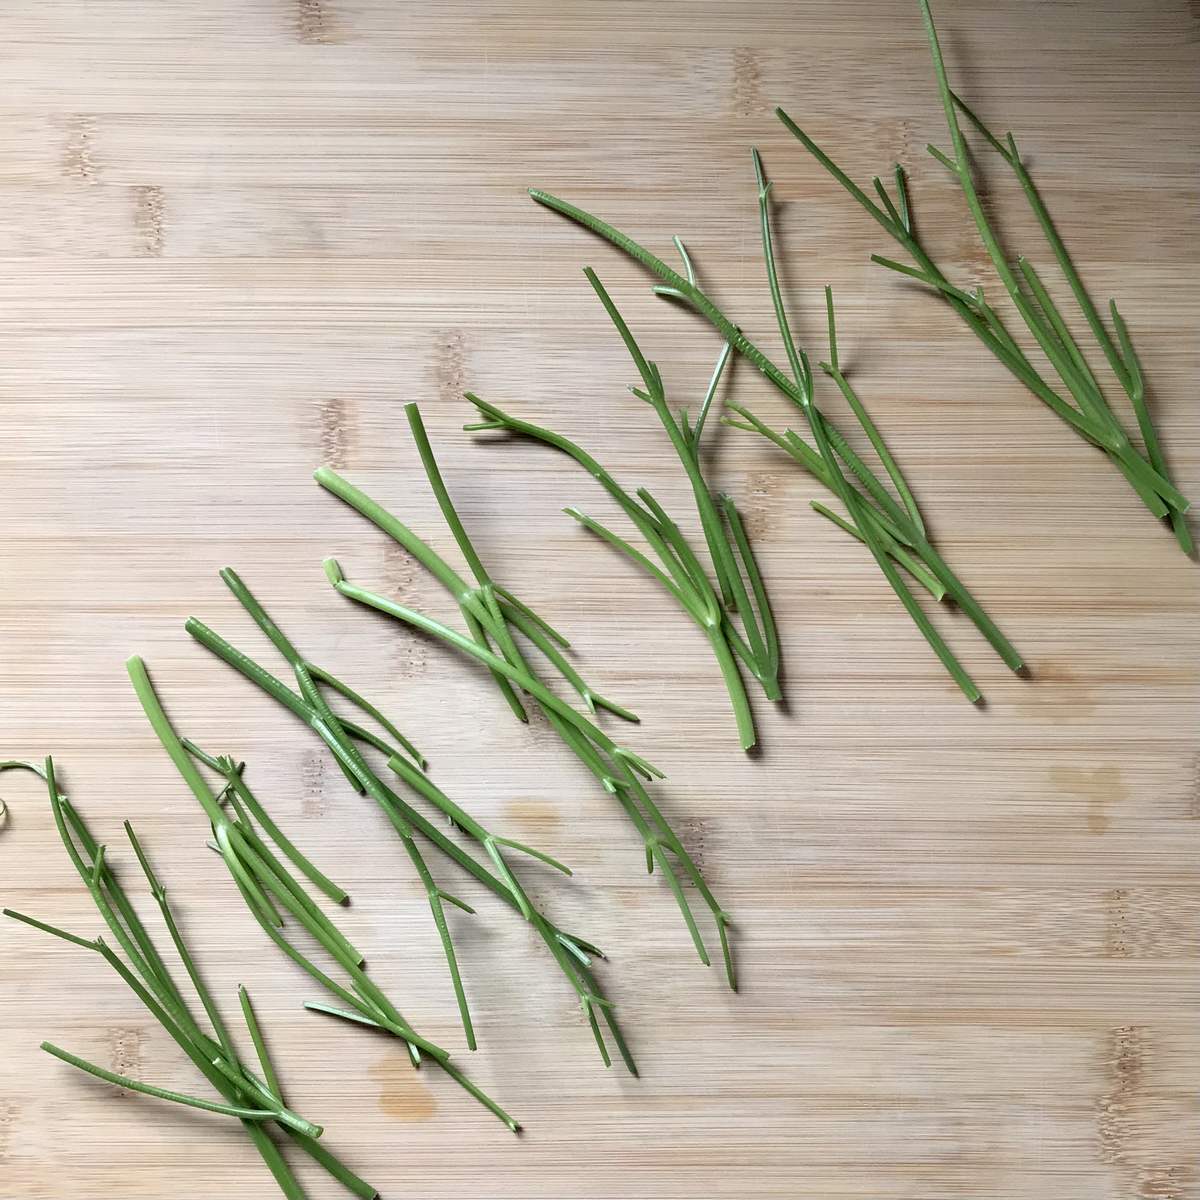 Small bundles of parsley stalks on a wooden board.